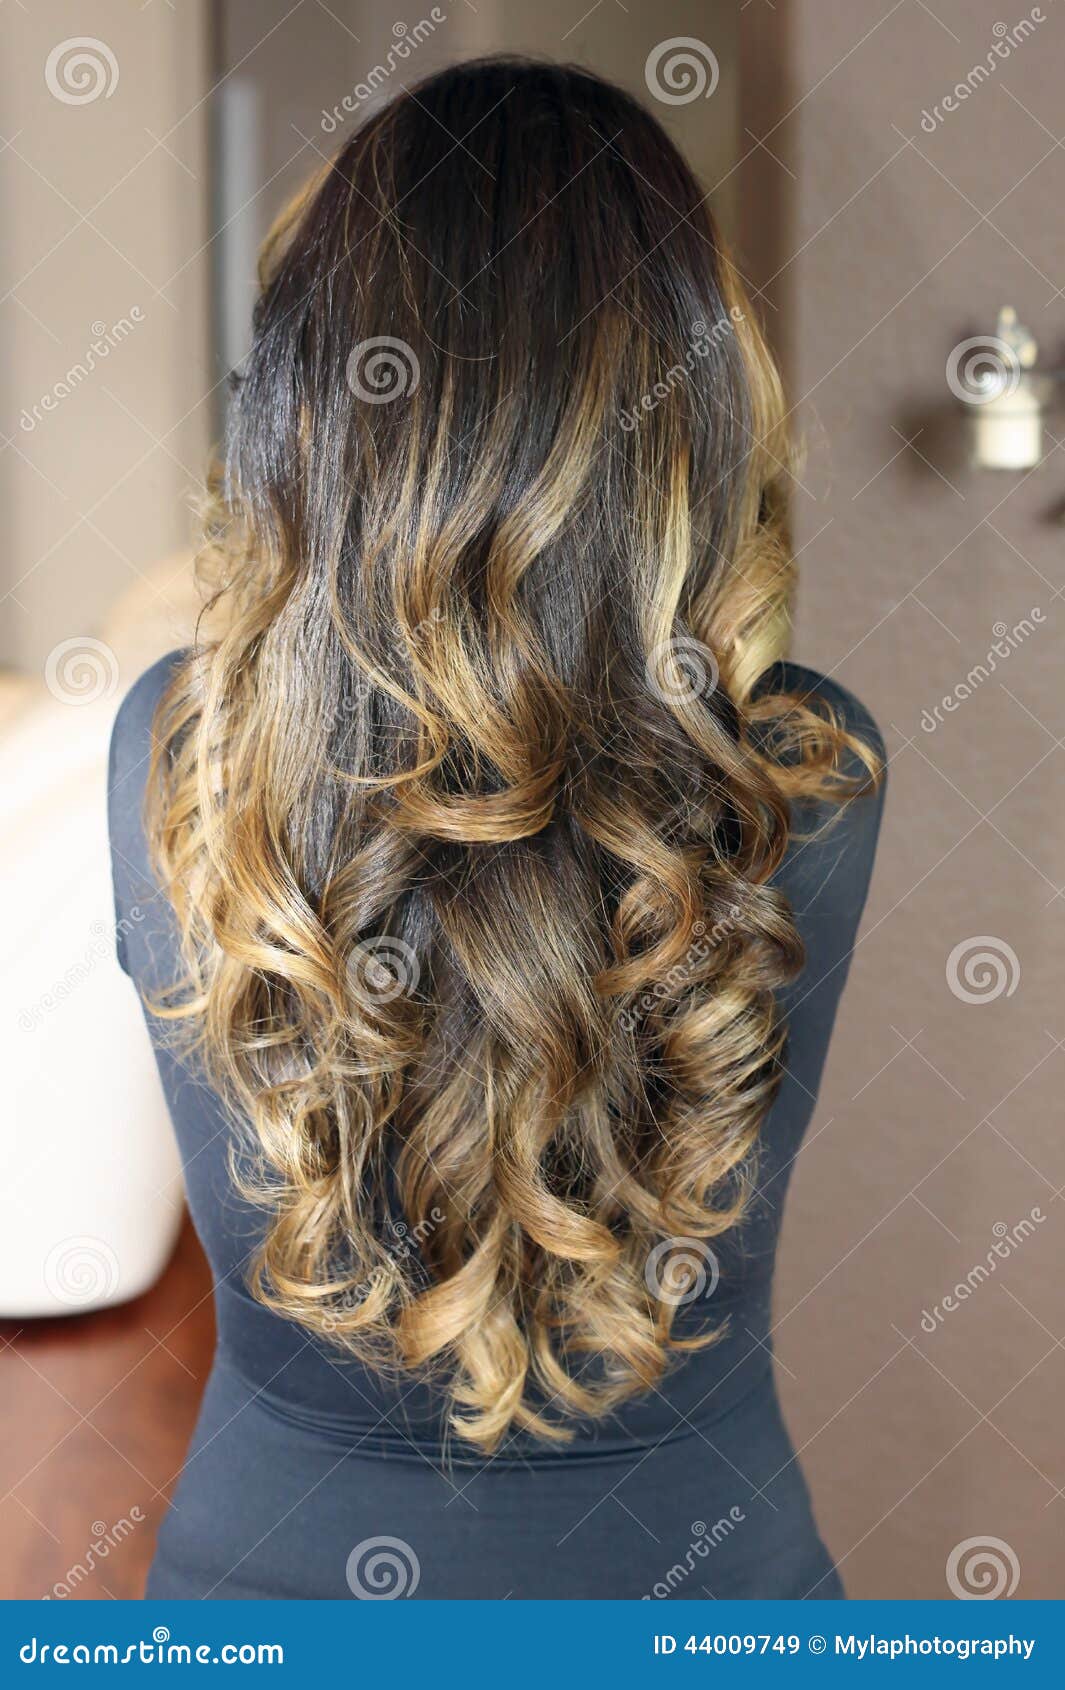 Hair model stock image. Image of layers, model, color - 44009749